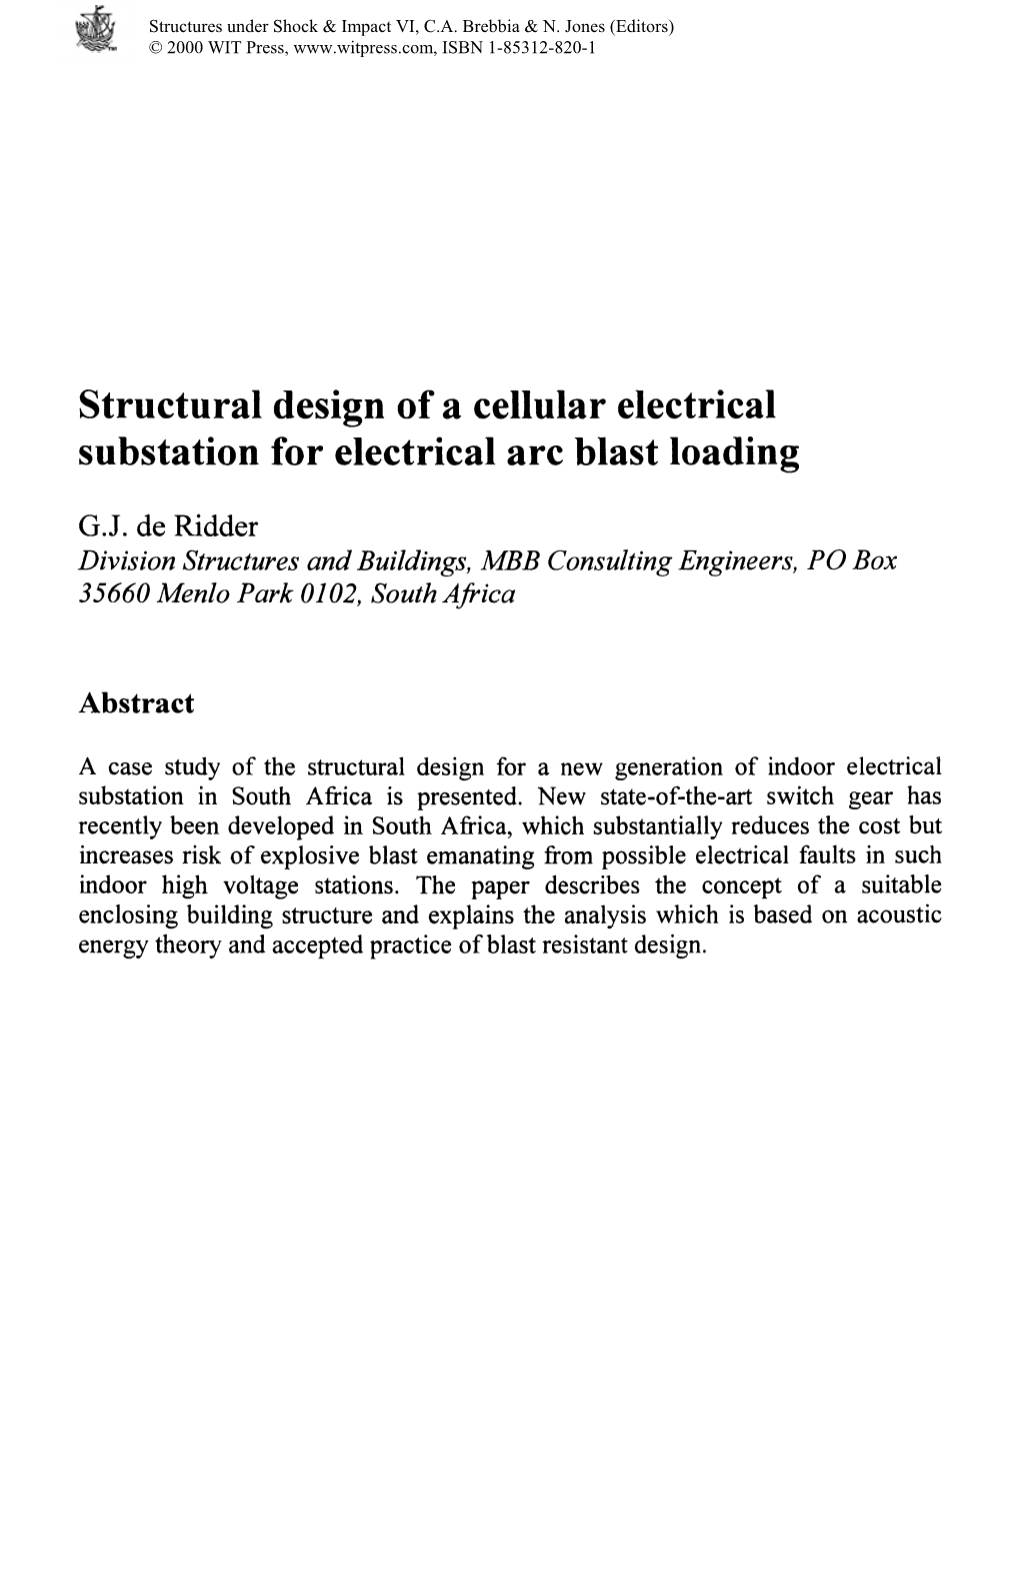 Structural Design of a Cellular Electrical Substation for Electrical Arc Blast Loading